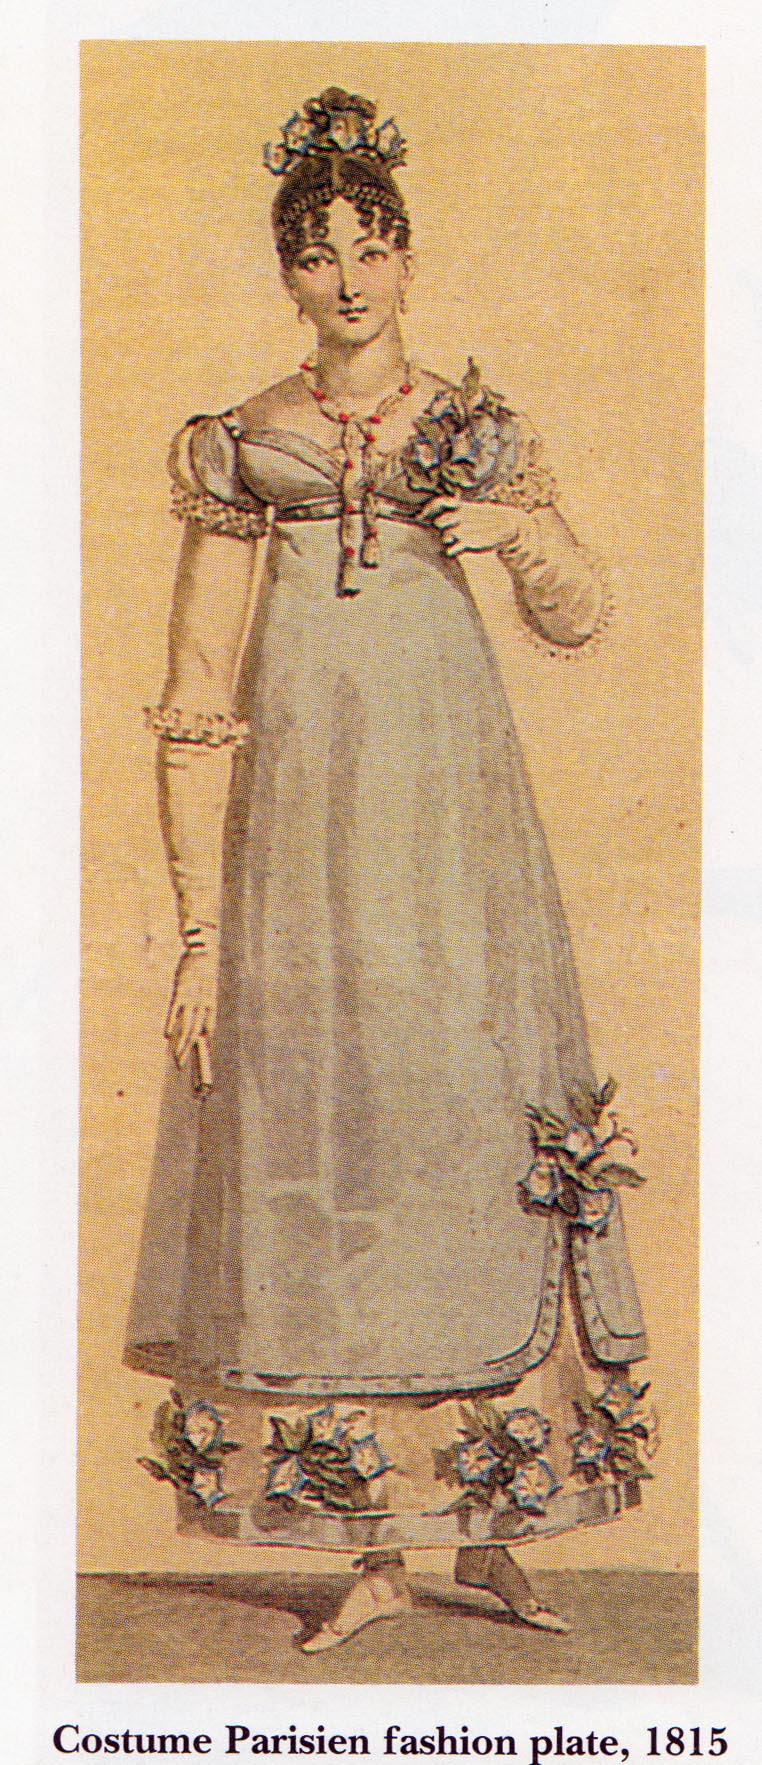 1815 Fashion plate showing a lavender regency ballgown with a white underpetticoat